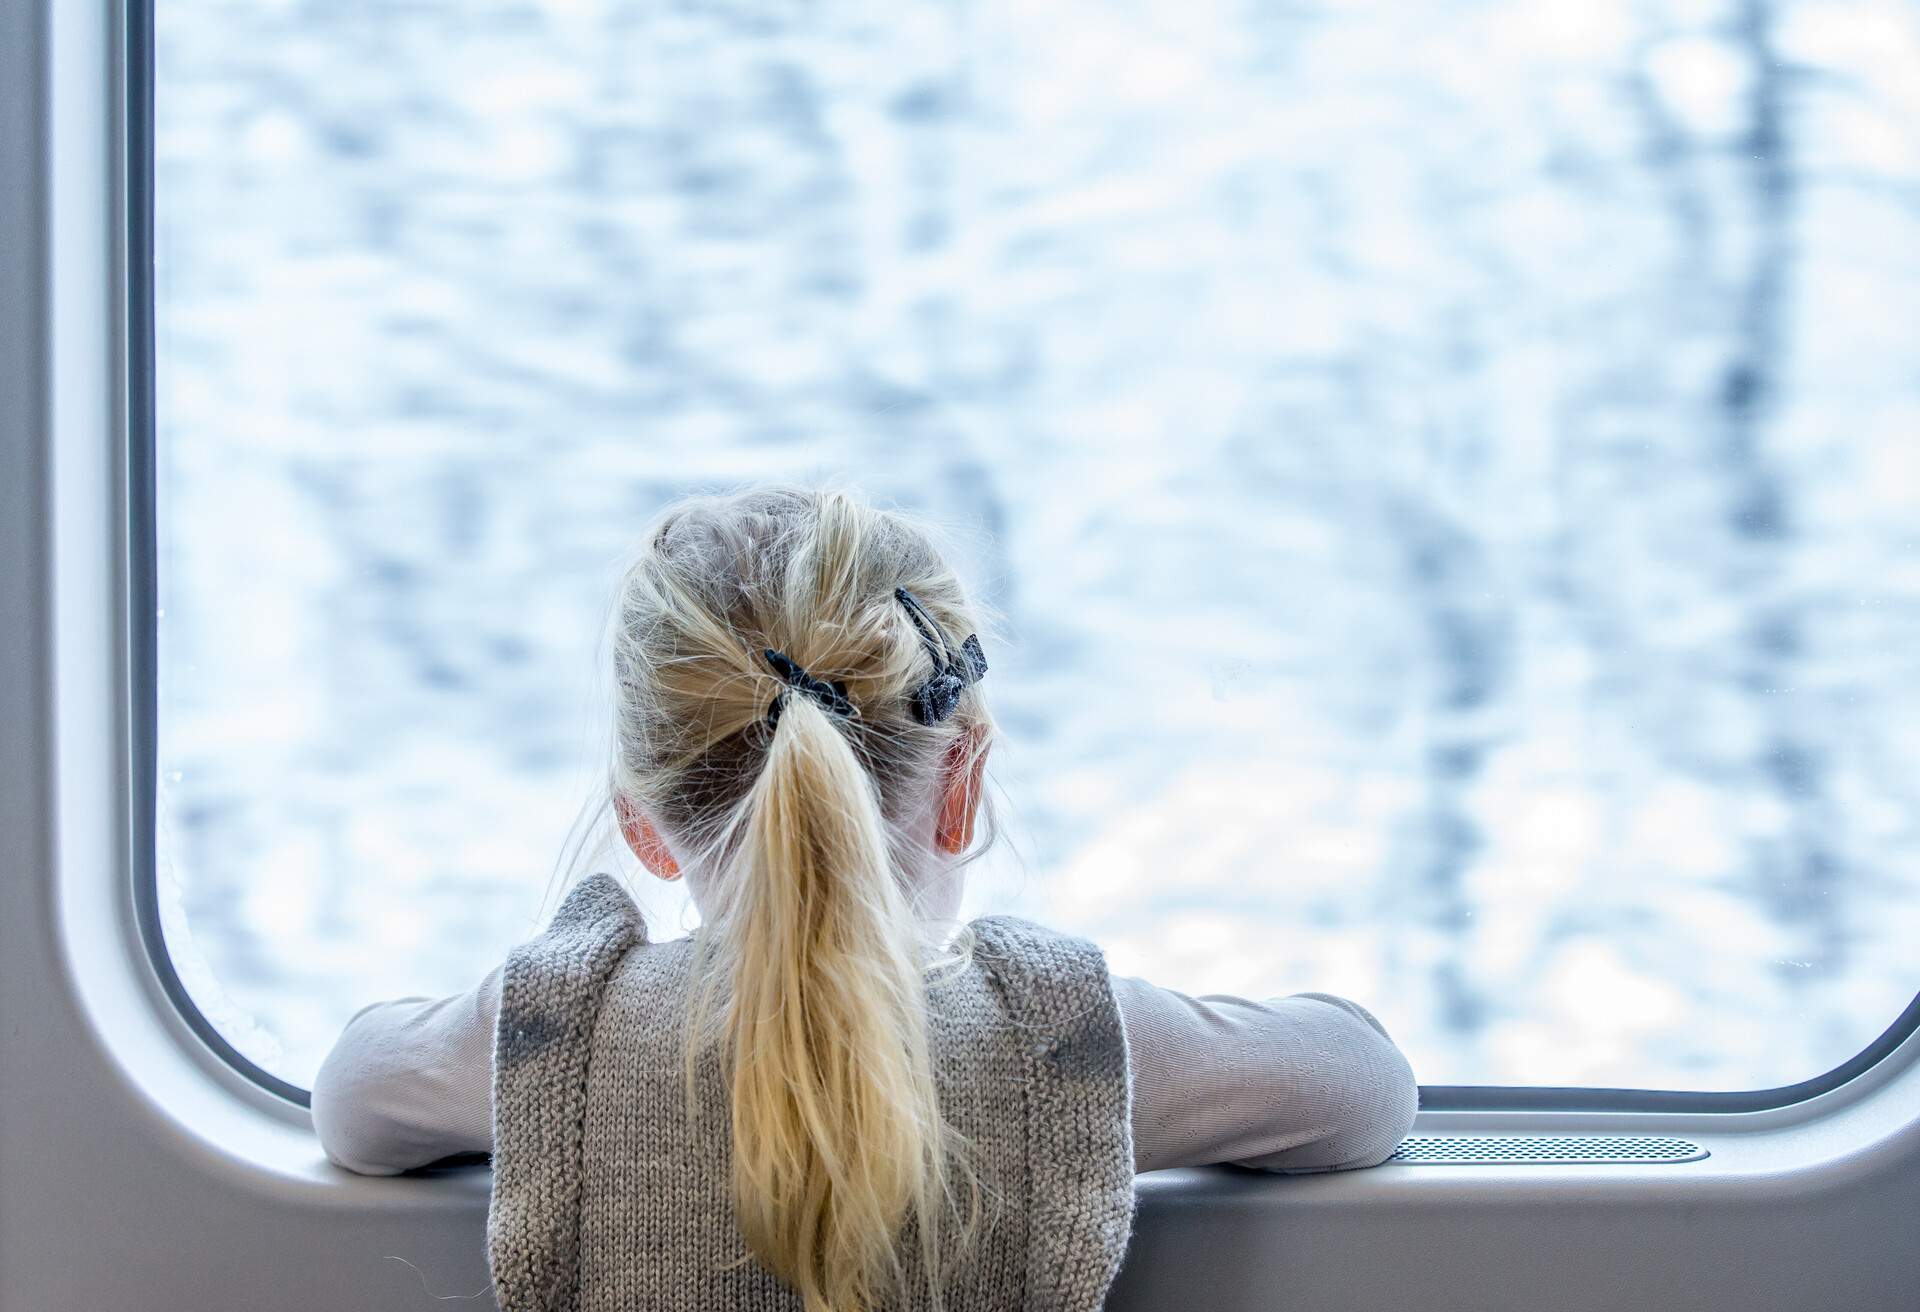 Girl riding a train and looking out of the window, NORWAY